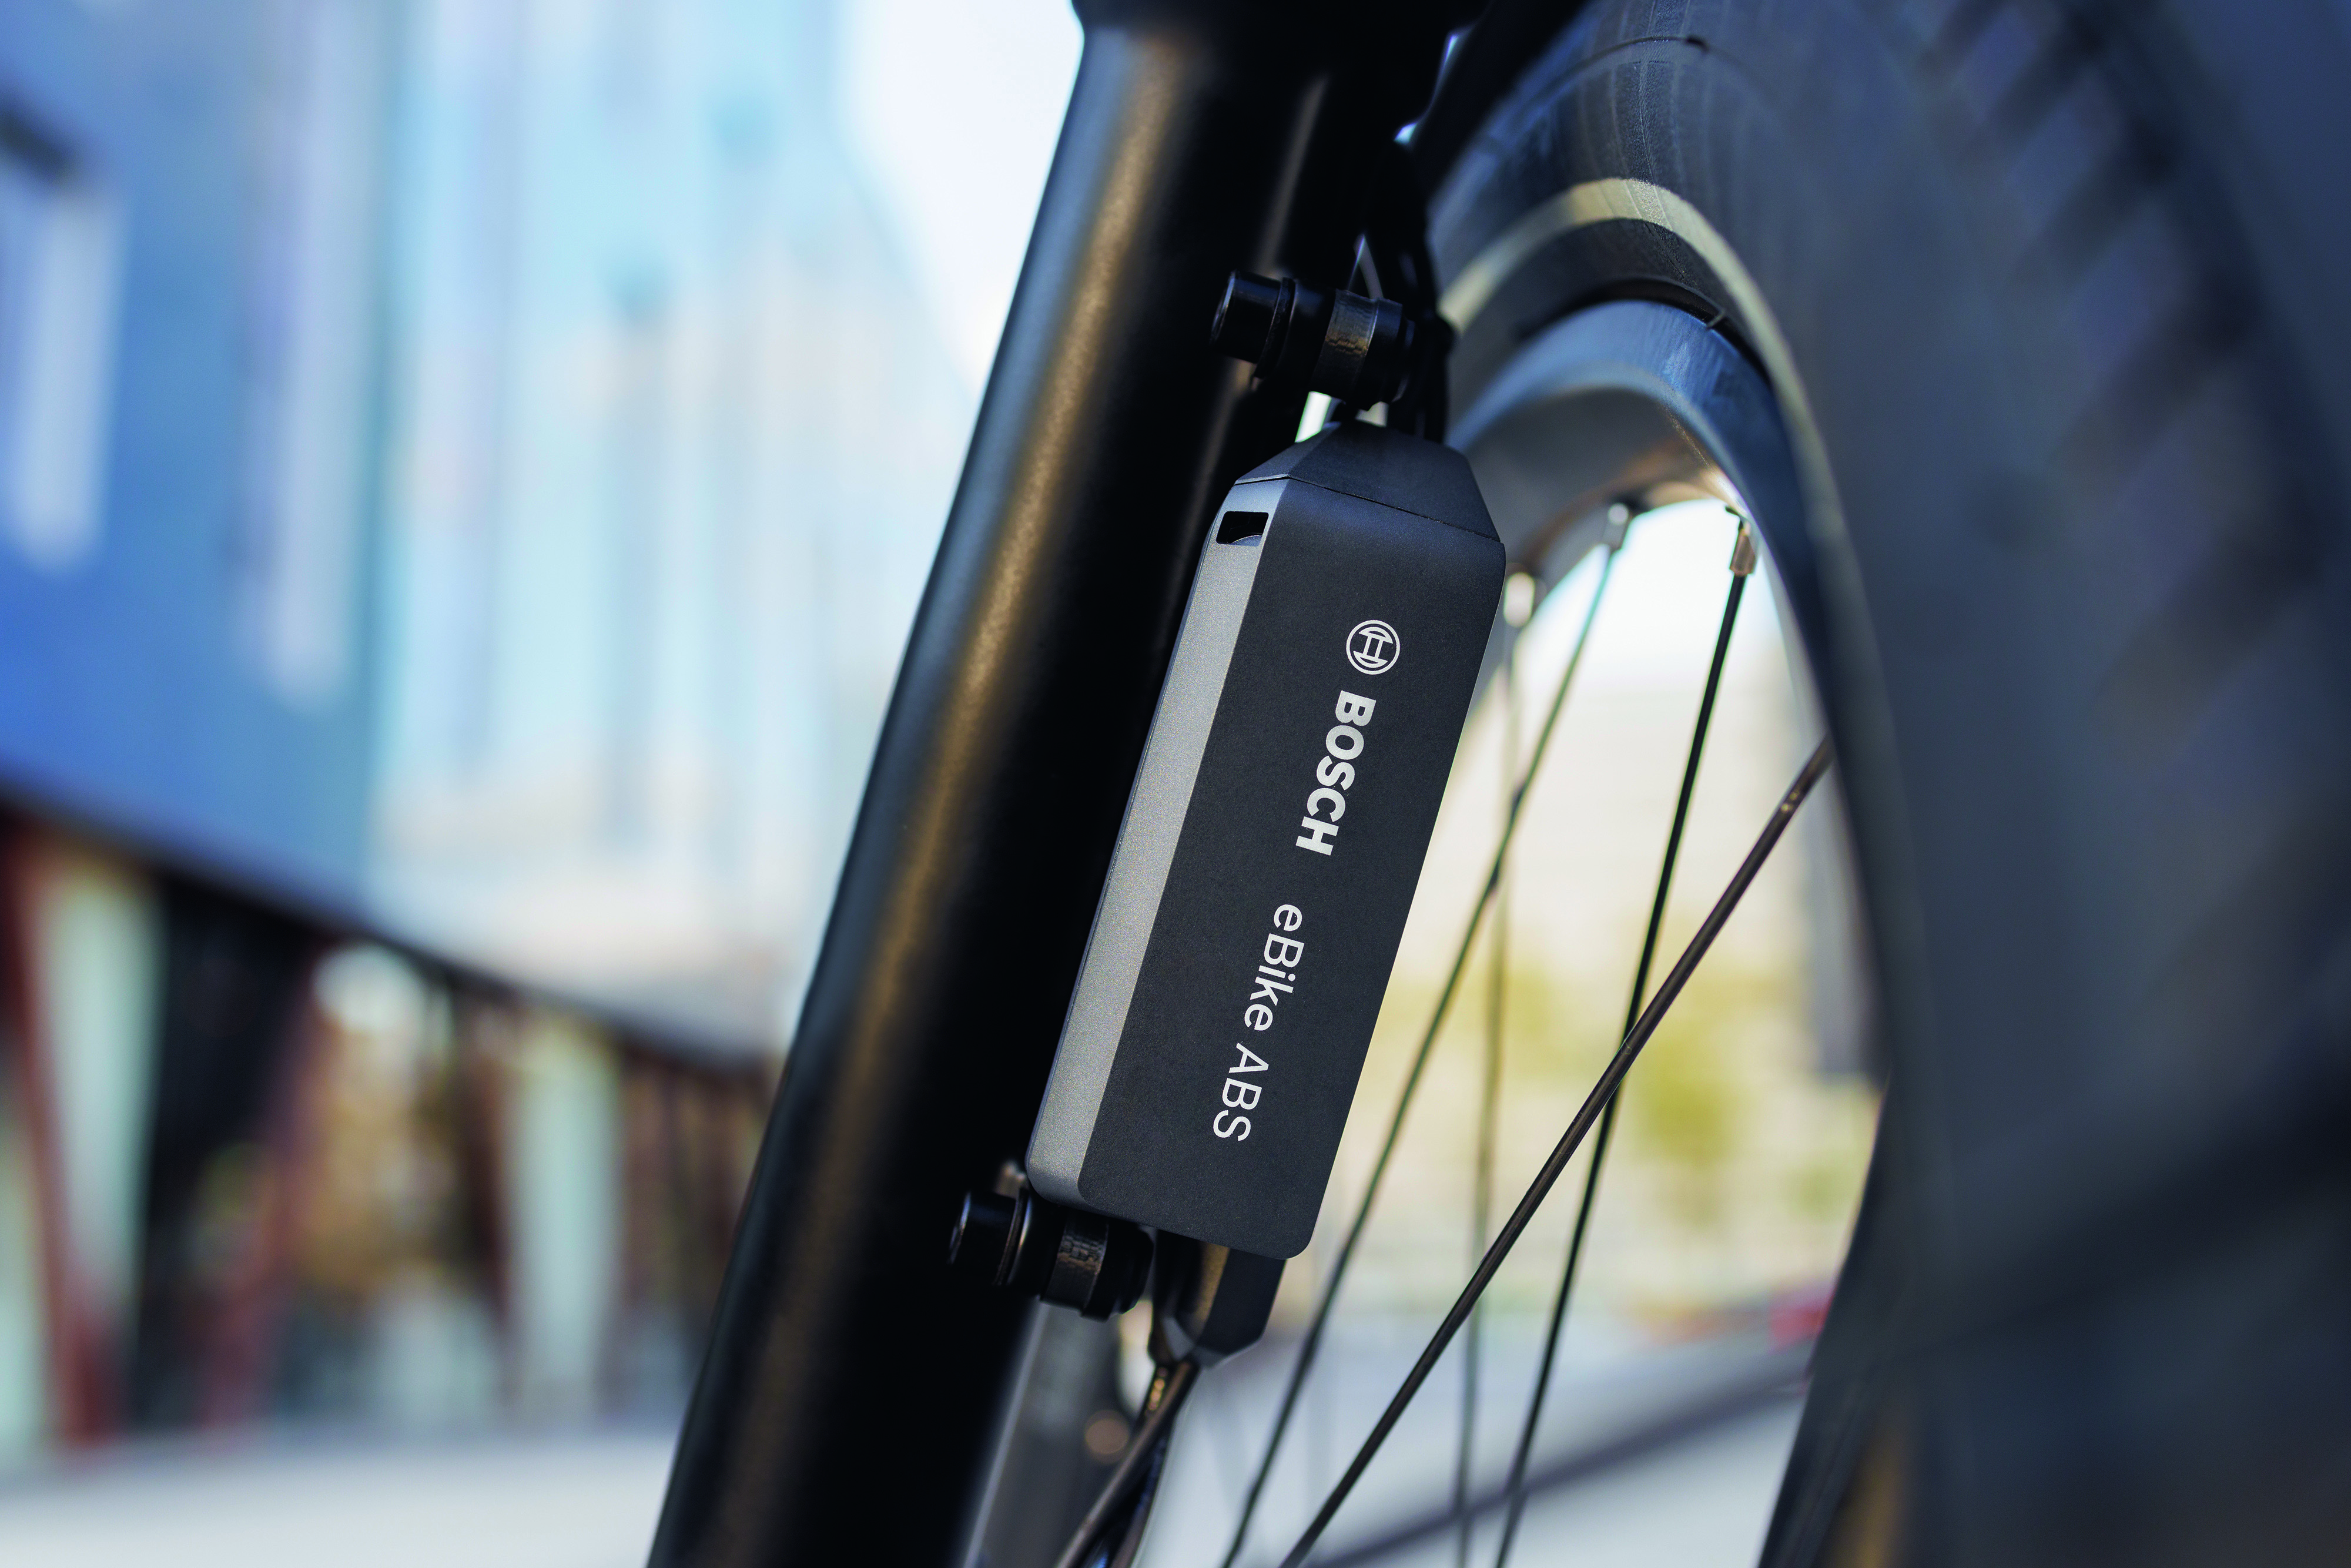 The new ABS from Bosch eBike Systems is the world's smallest ABS developed based on motorcycle technology. 